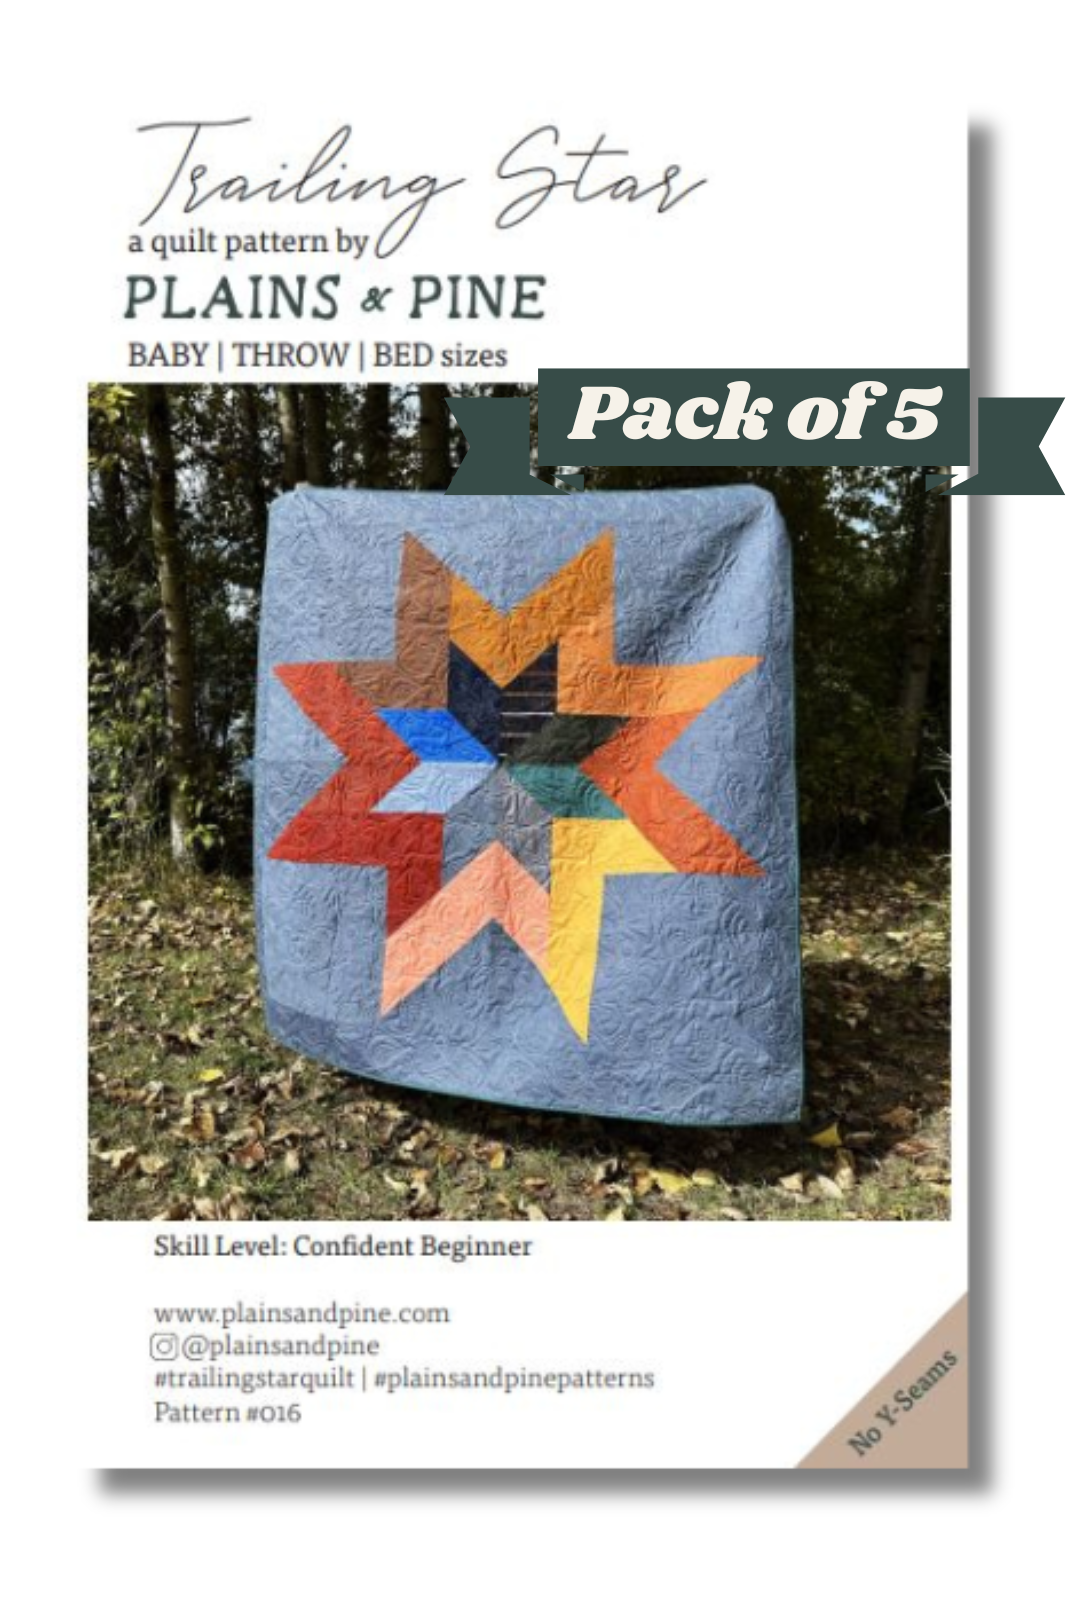 WHOLESALE - Trailing Star Quilt Pattern, Pack of 5 patterns